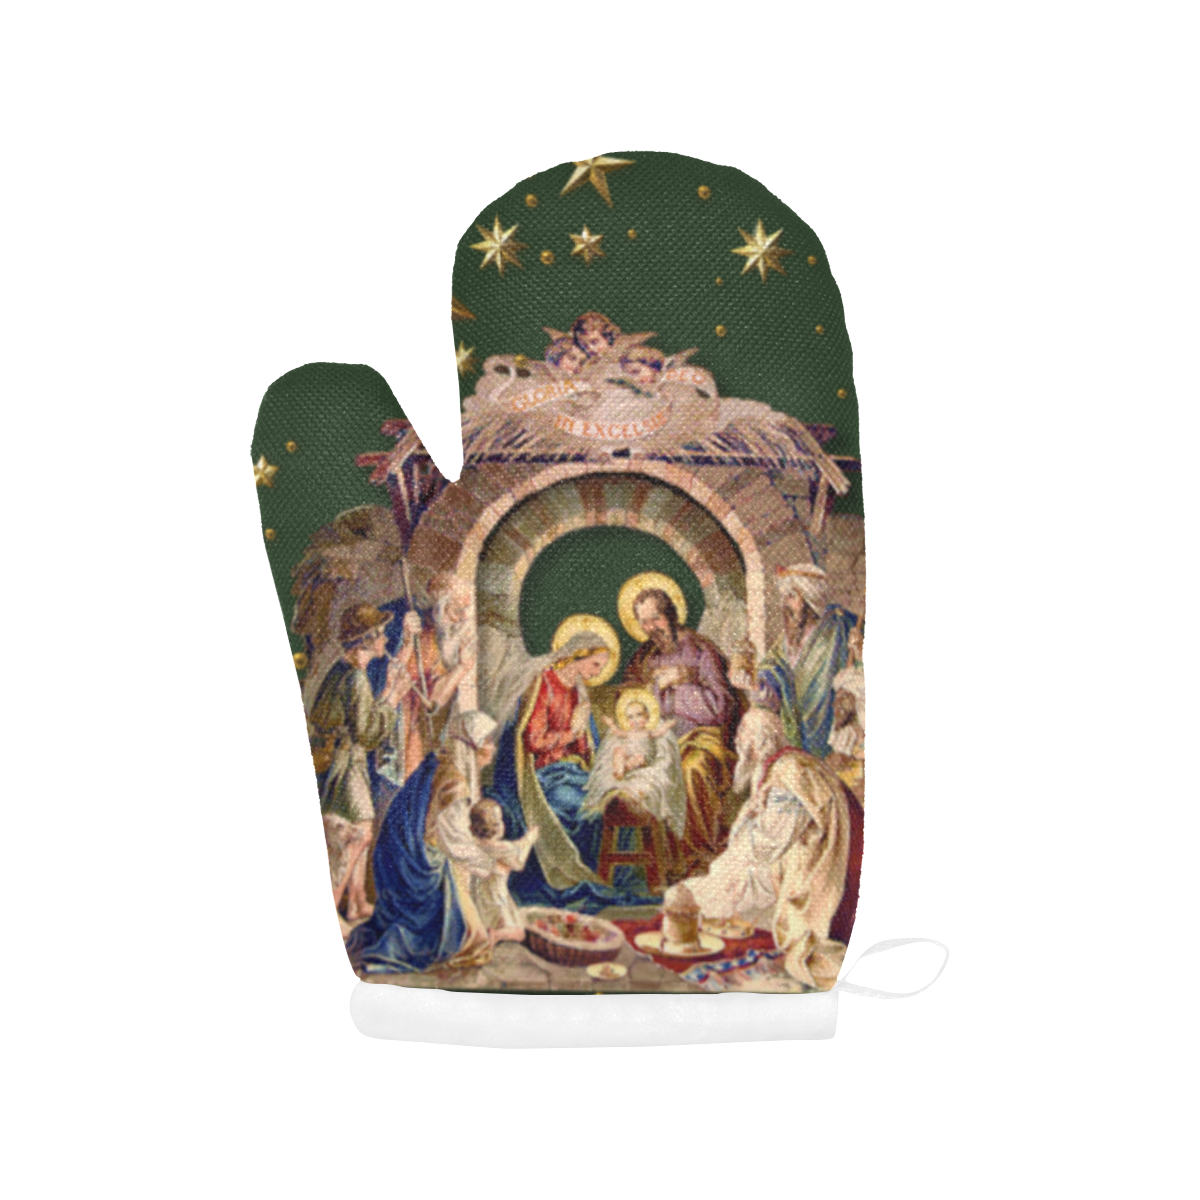 Nativity Oven Mittens Forrest Green Oven Mitt (Two Pieces)